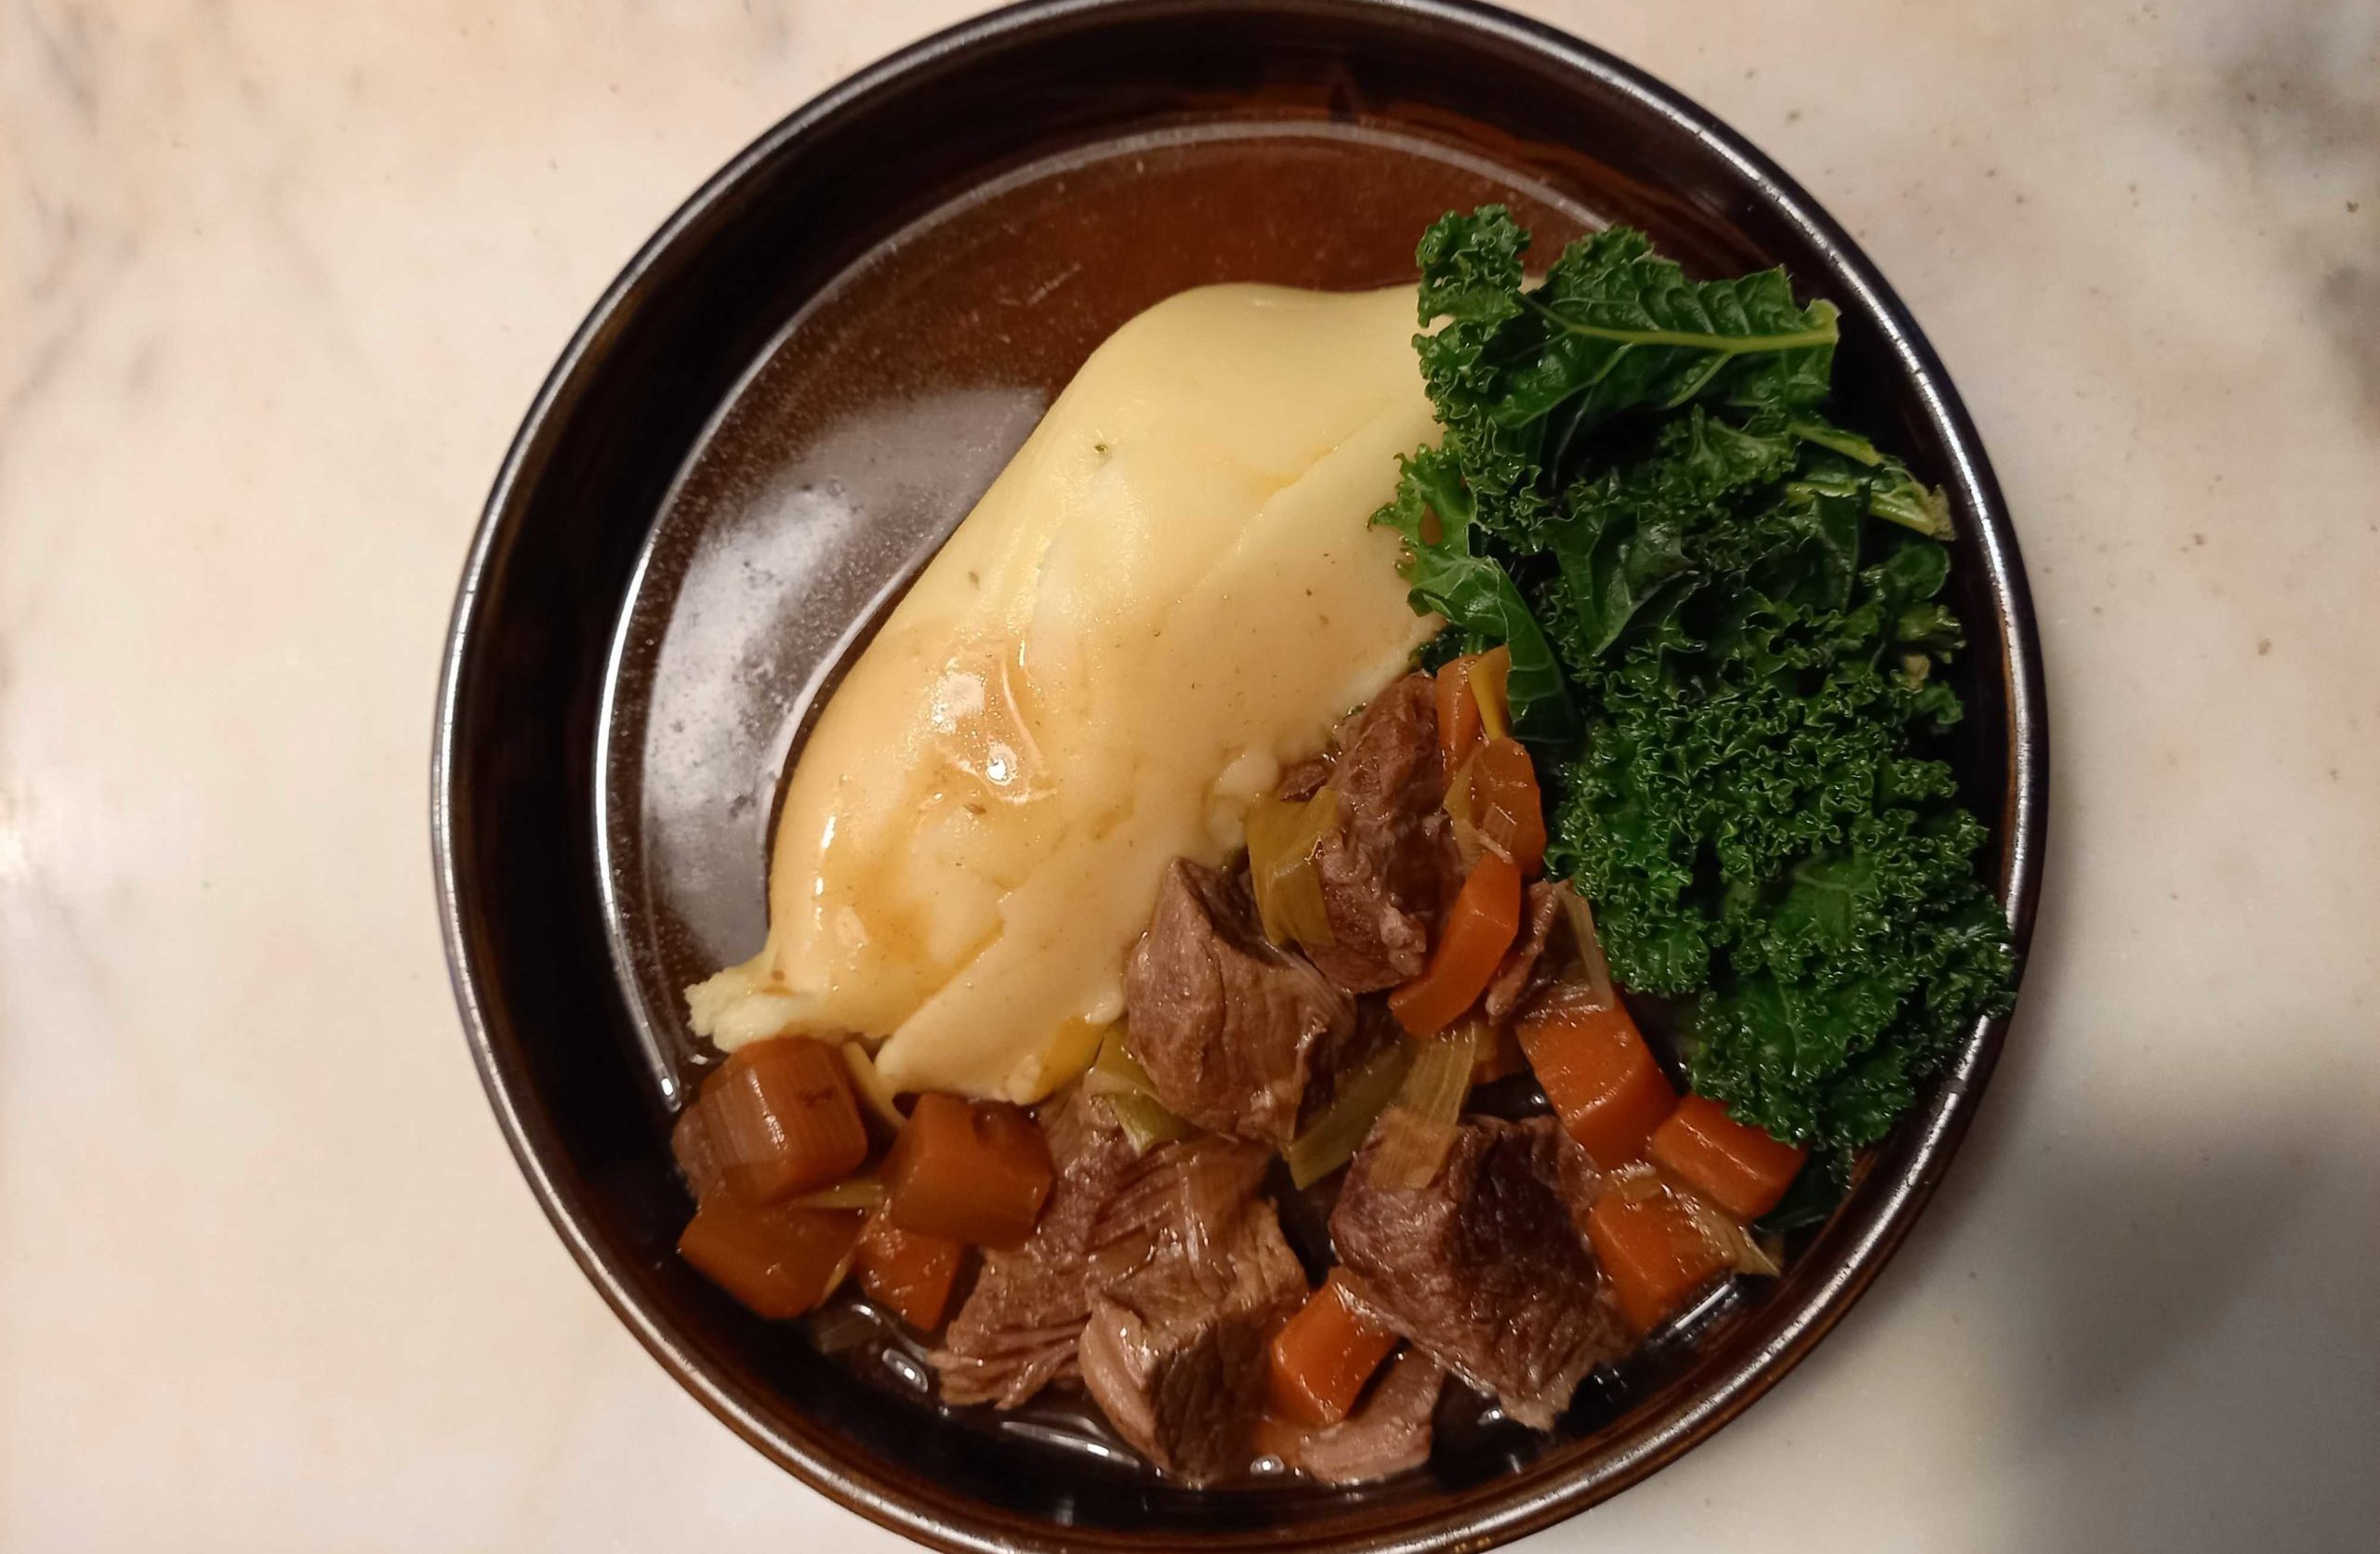 A round bowl with mashed potato, kale, beef stew and gravy